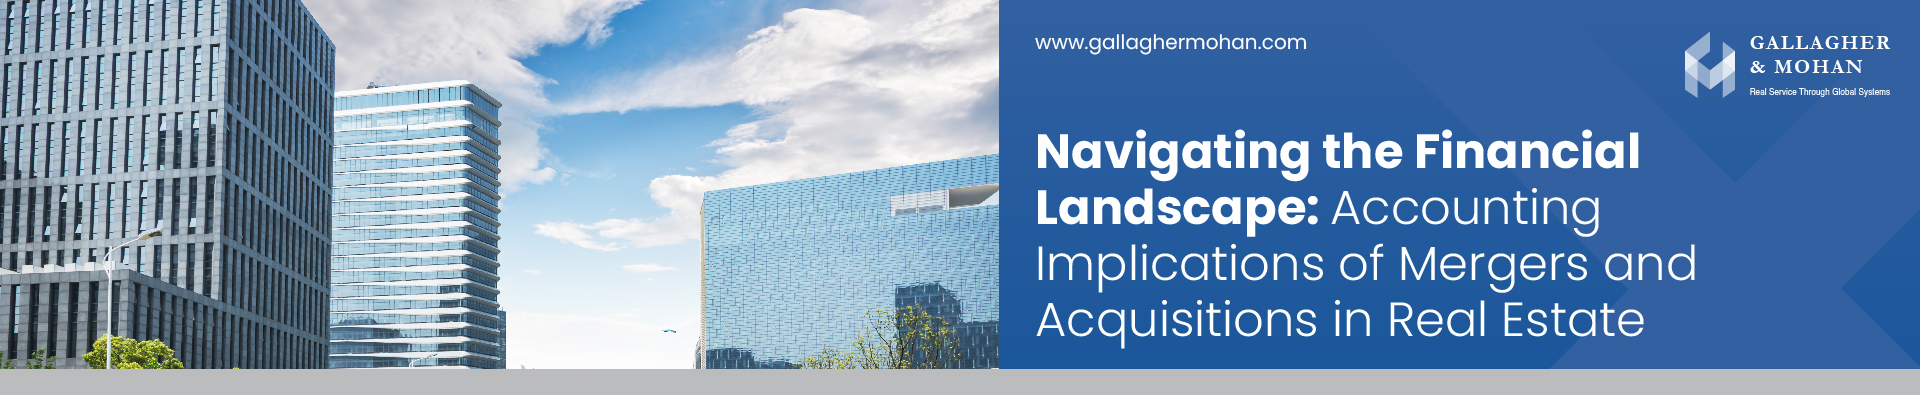 Navigating The Financial Landscape Accounting Implications Of Mergers And Acquisitions In Real Estate